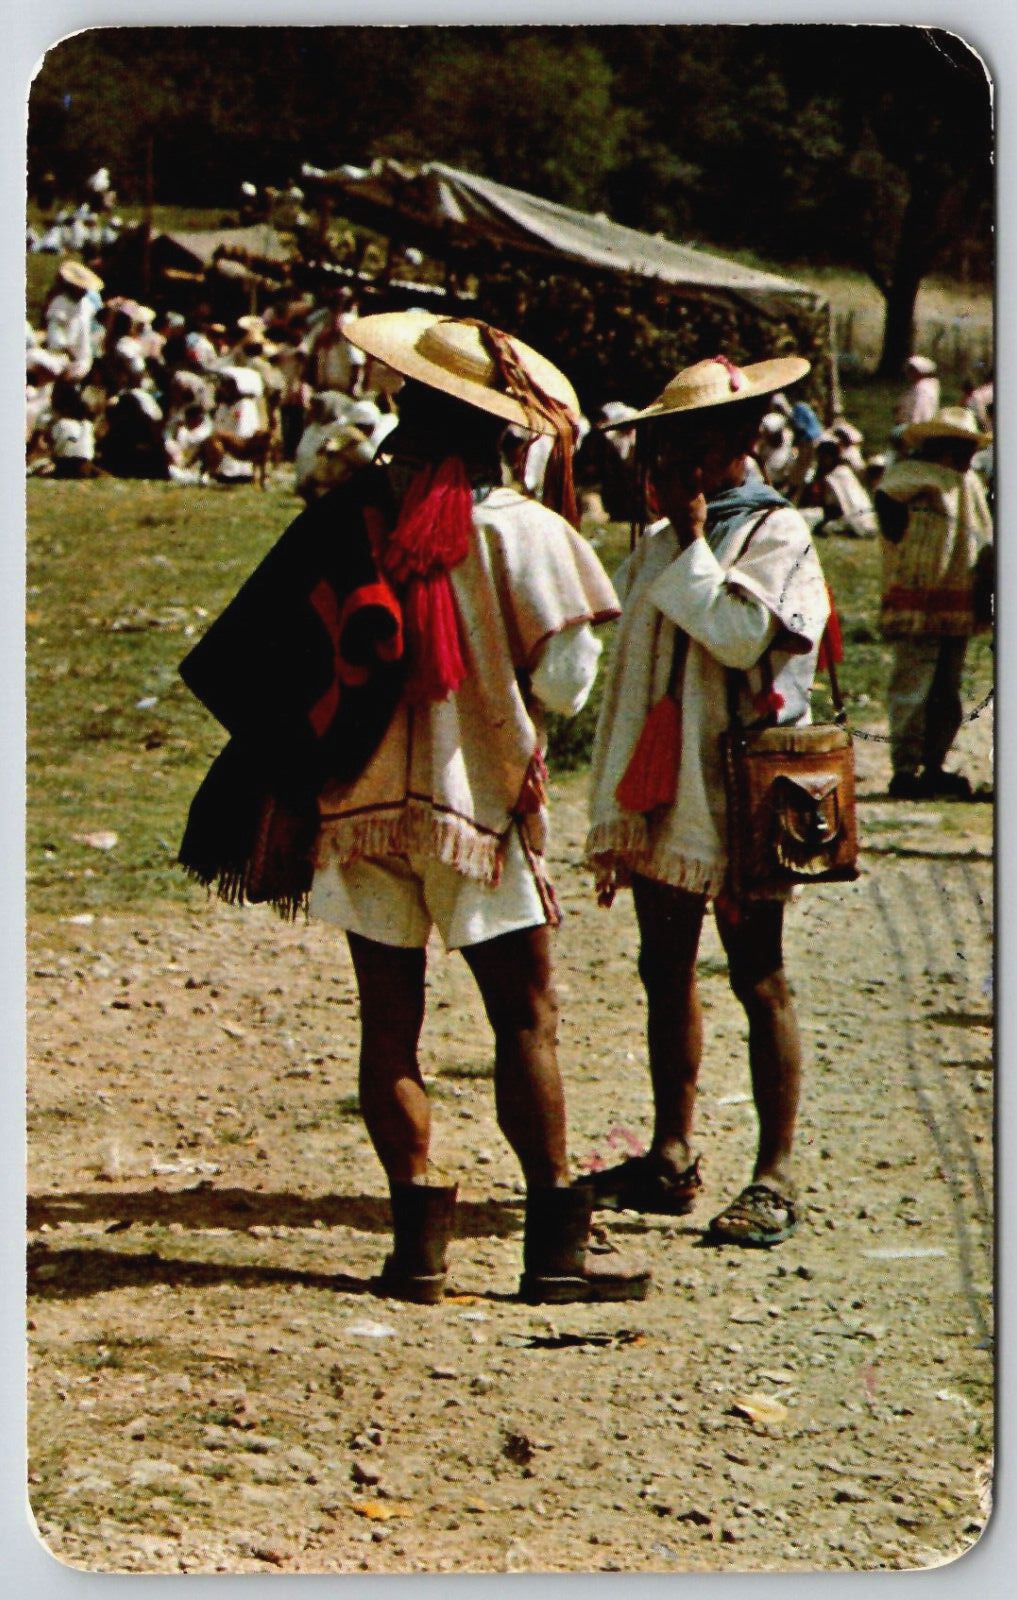 Vintage Postcard - Typical Indigenous Dress from Zinacantan Mexico